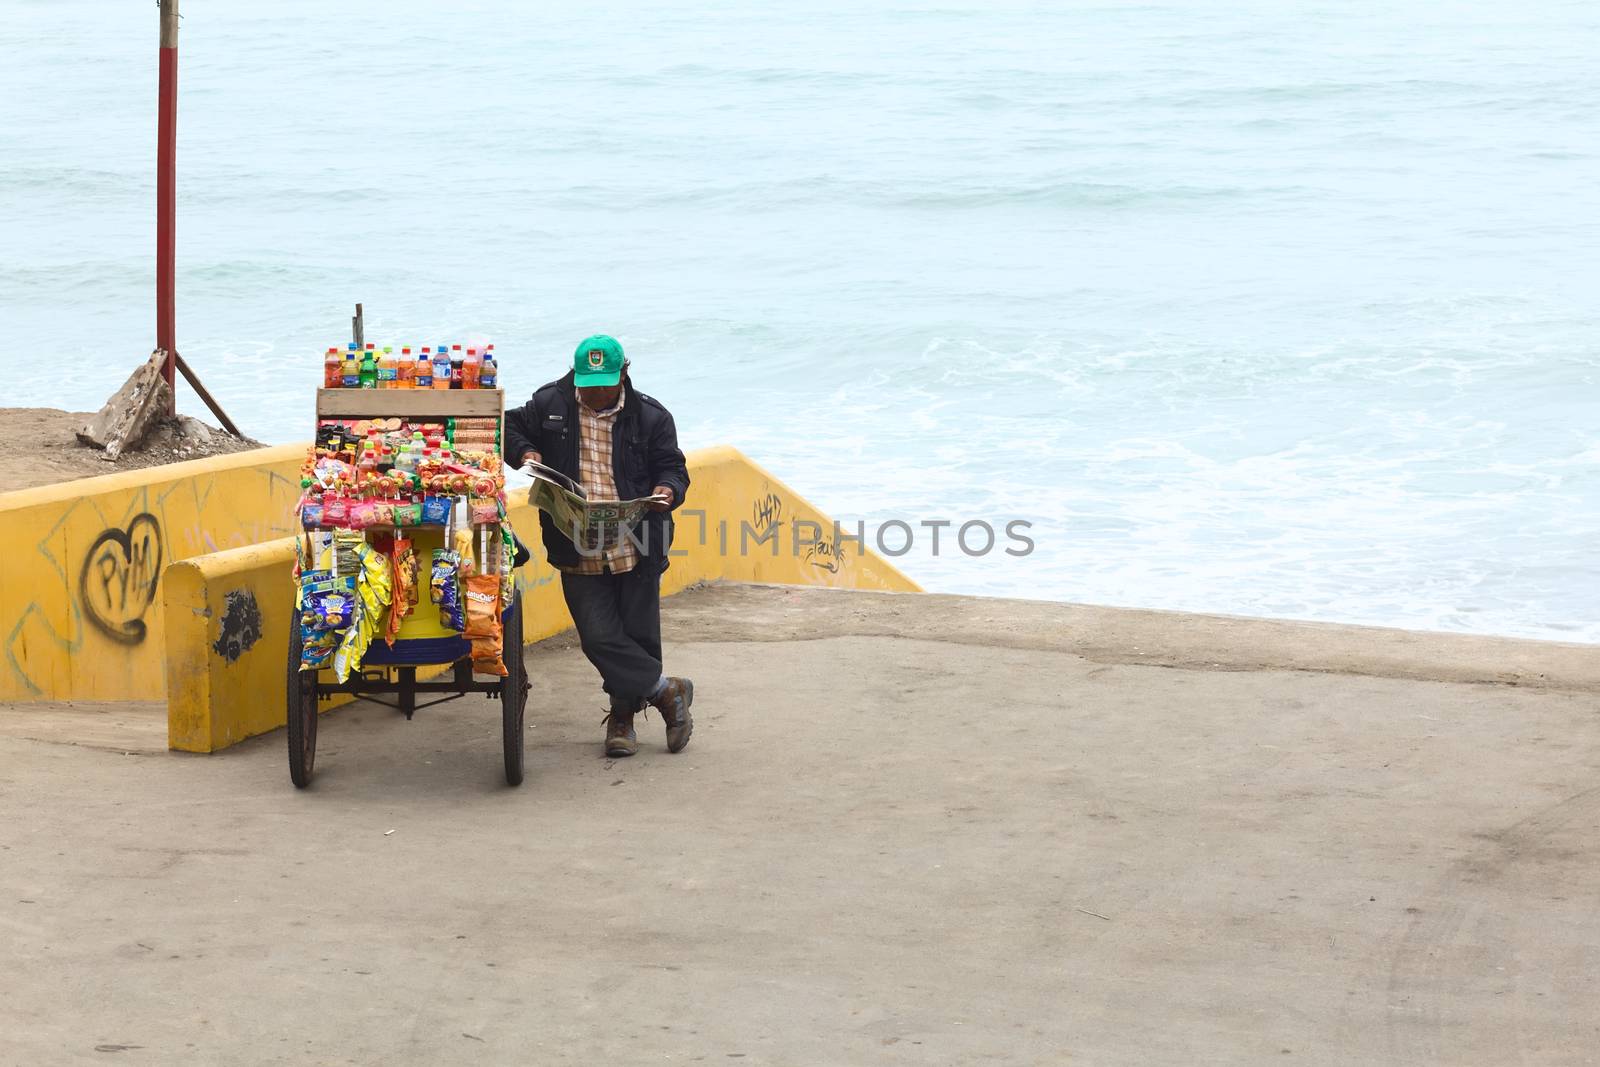 LIMA, PERU - JULY 5, 2013: Unidentified person reading a newspaper at snack cart filled with chips, sweets and drinks on the coast of Barranco on July 5, 2013 in Lima, Peru.  